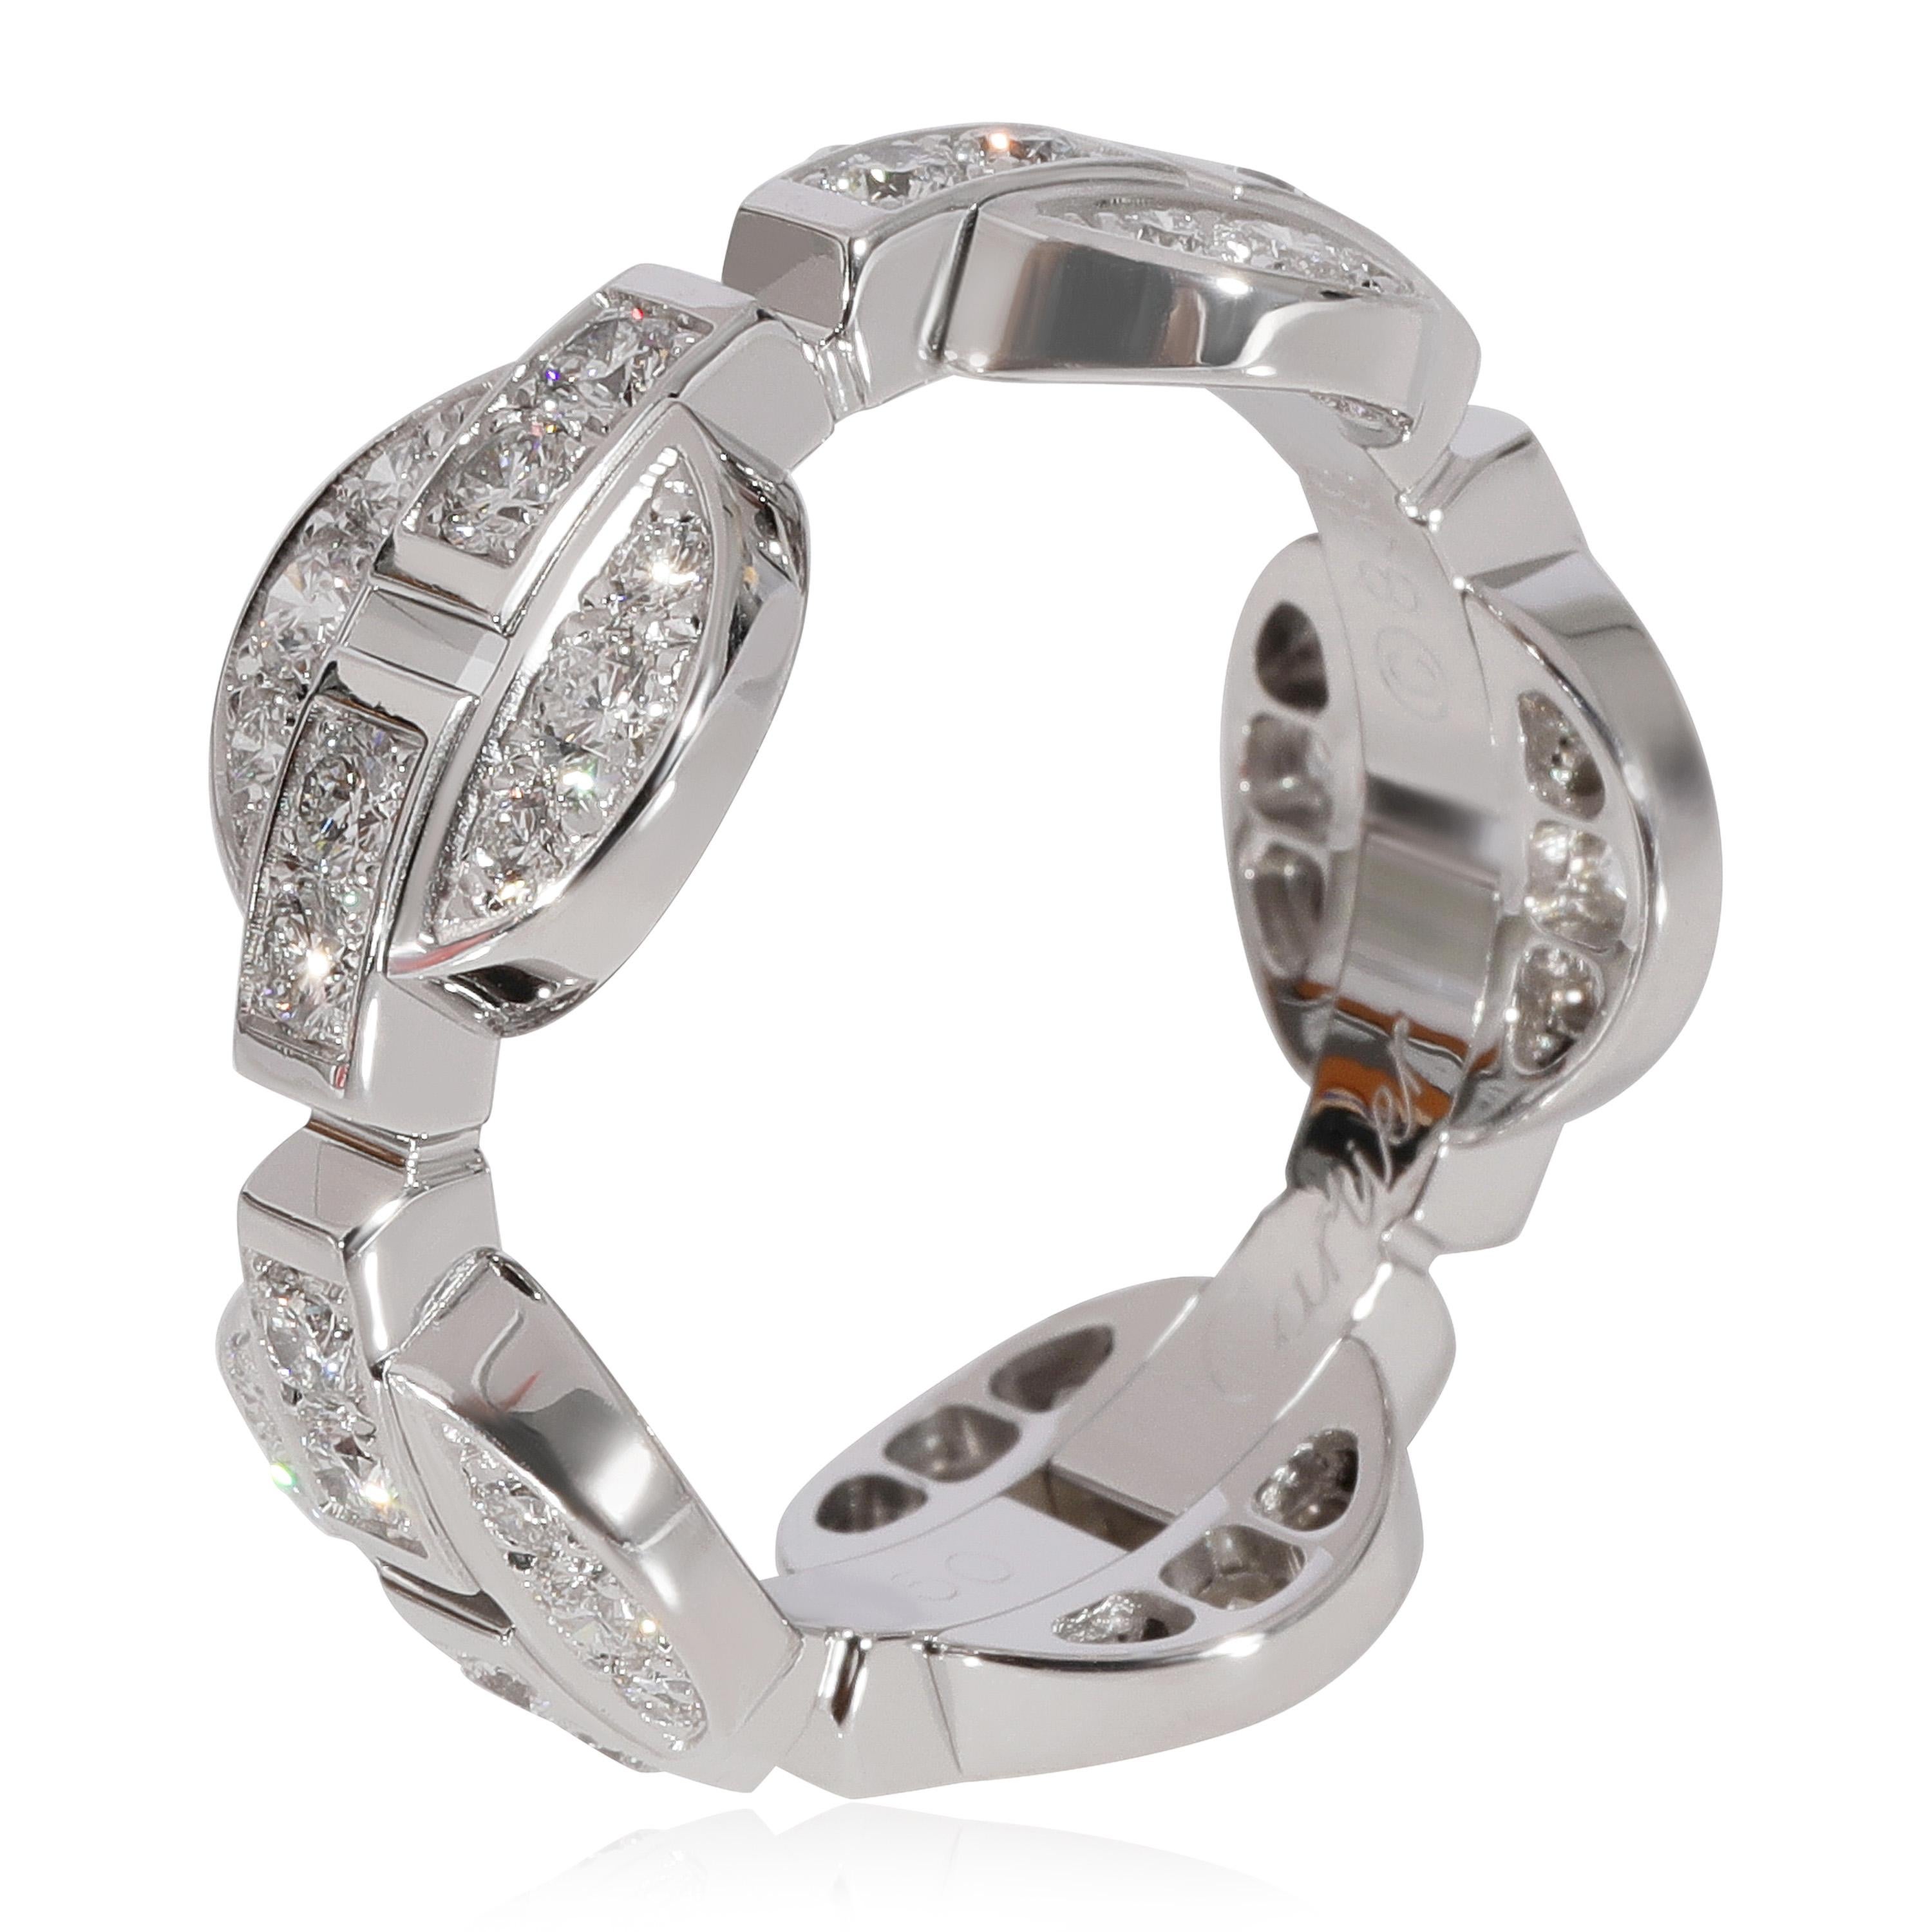 Cartier Himalia Diamond Band in 18K White Gold 1.75 CTW

PRIMARY DETAILS
SKU: 122920
Listing Title: Cartier Himalia Diamond Band in 18K White Gold 1.75 CTW
Condition Description: Retails for 8900 USD. In excellent condition and recently polished.